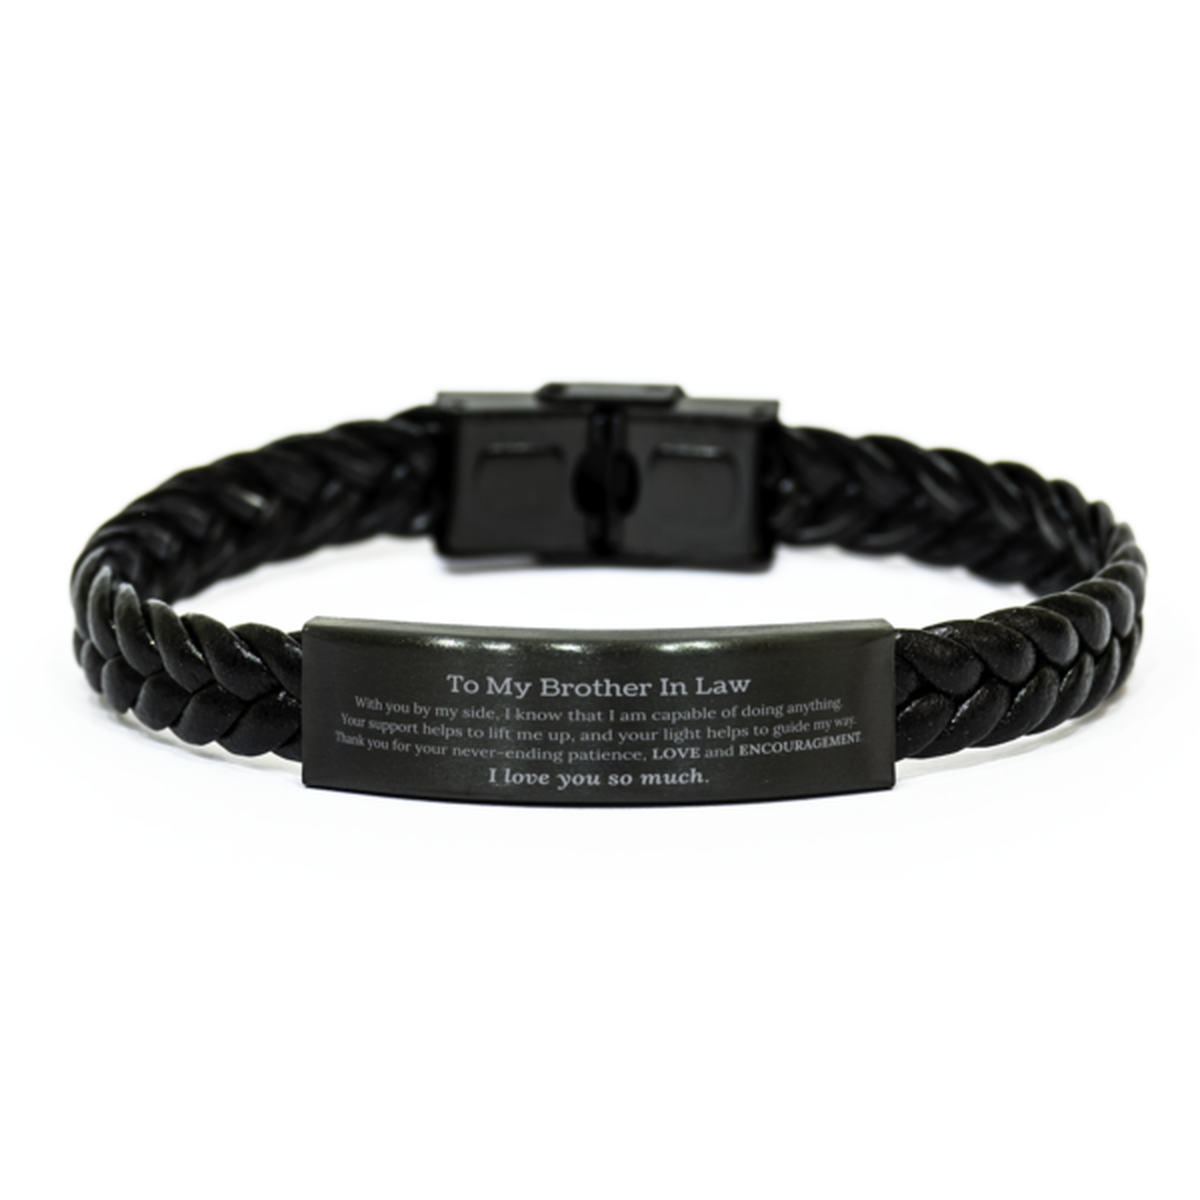 Appreciation Brother In Law Braided Leather Bracelet Gifts, To My Brother In Law Birthday Christmas Wedding Keepsake Gifts for Brother In Law With you by my side, I know that I am capable of doing anything. I love you so much